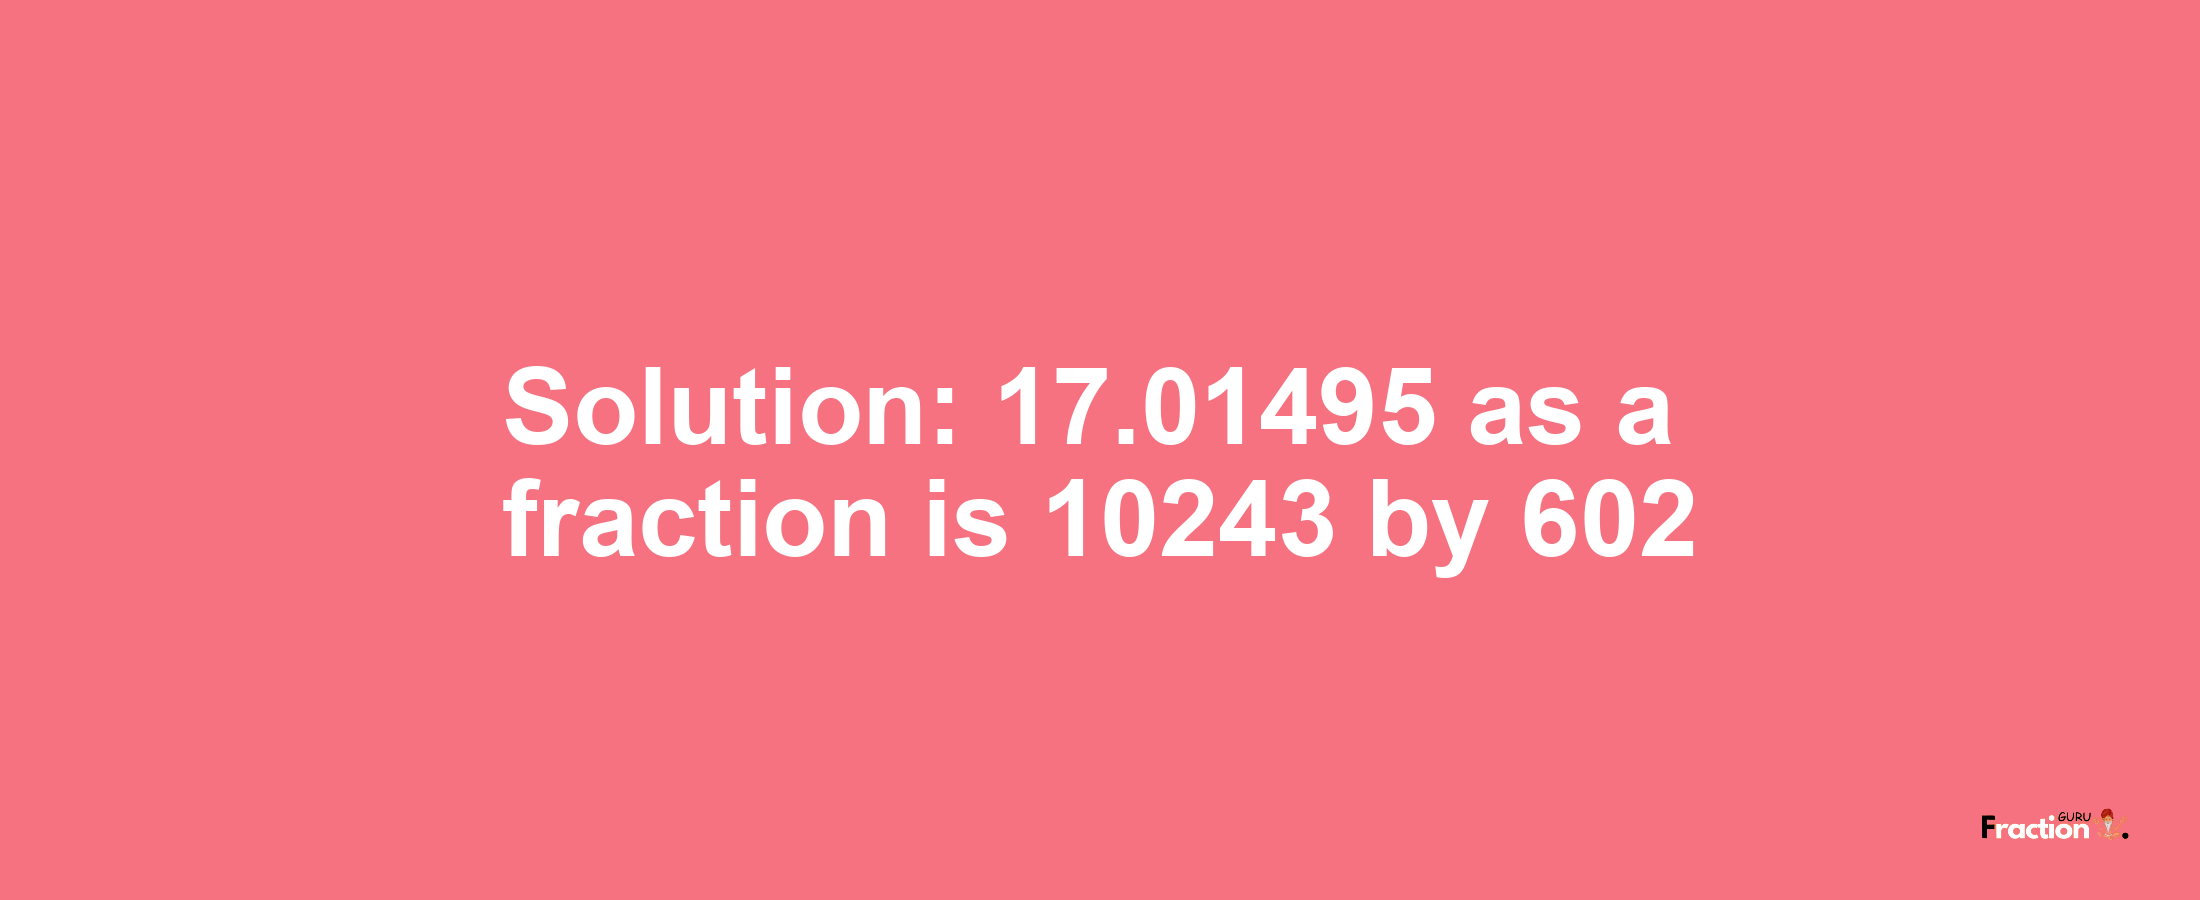 Solution:17.01495 as a fraction is 10243/602